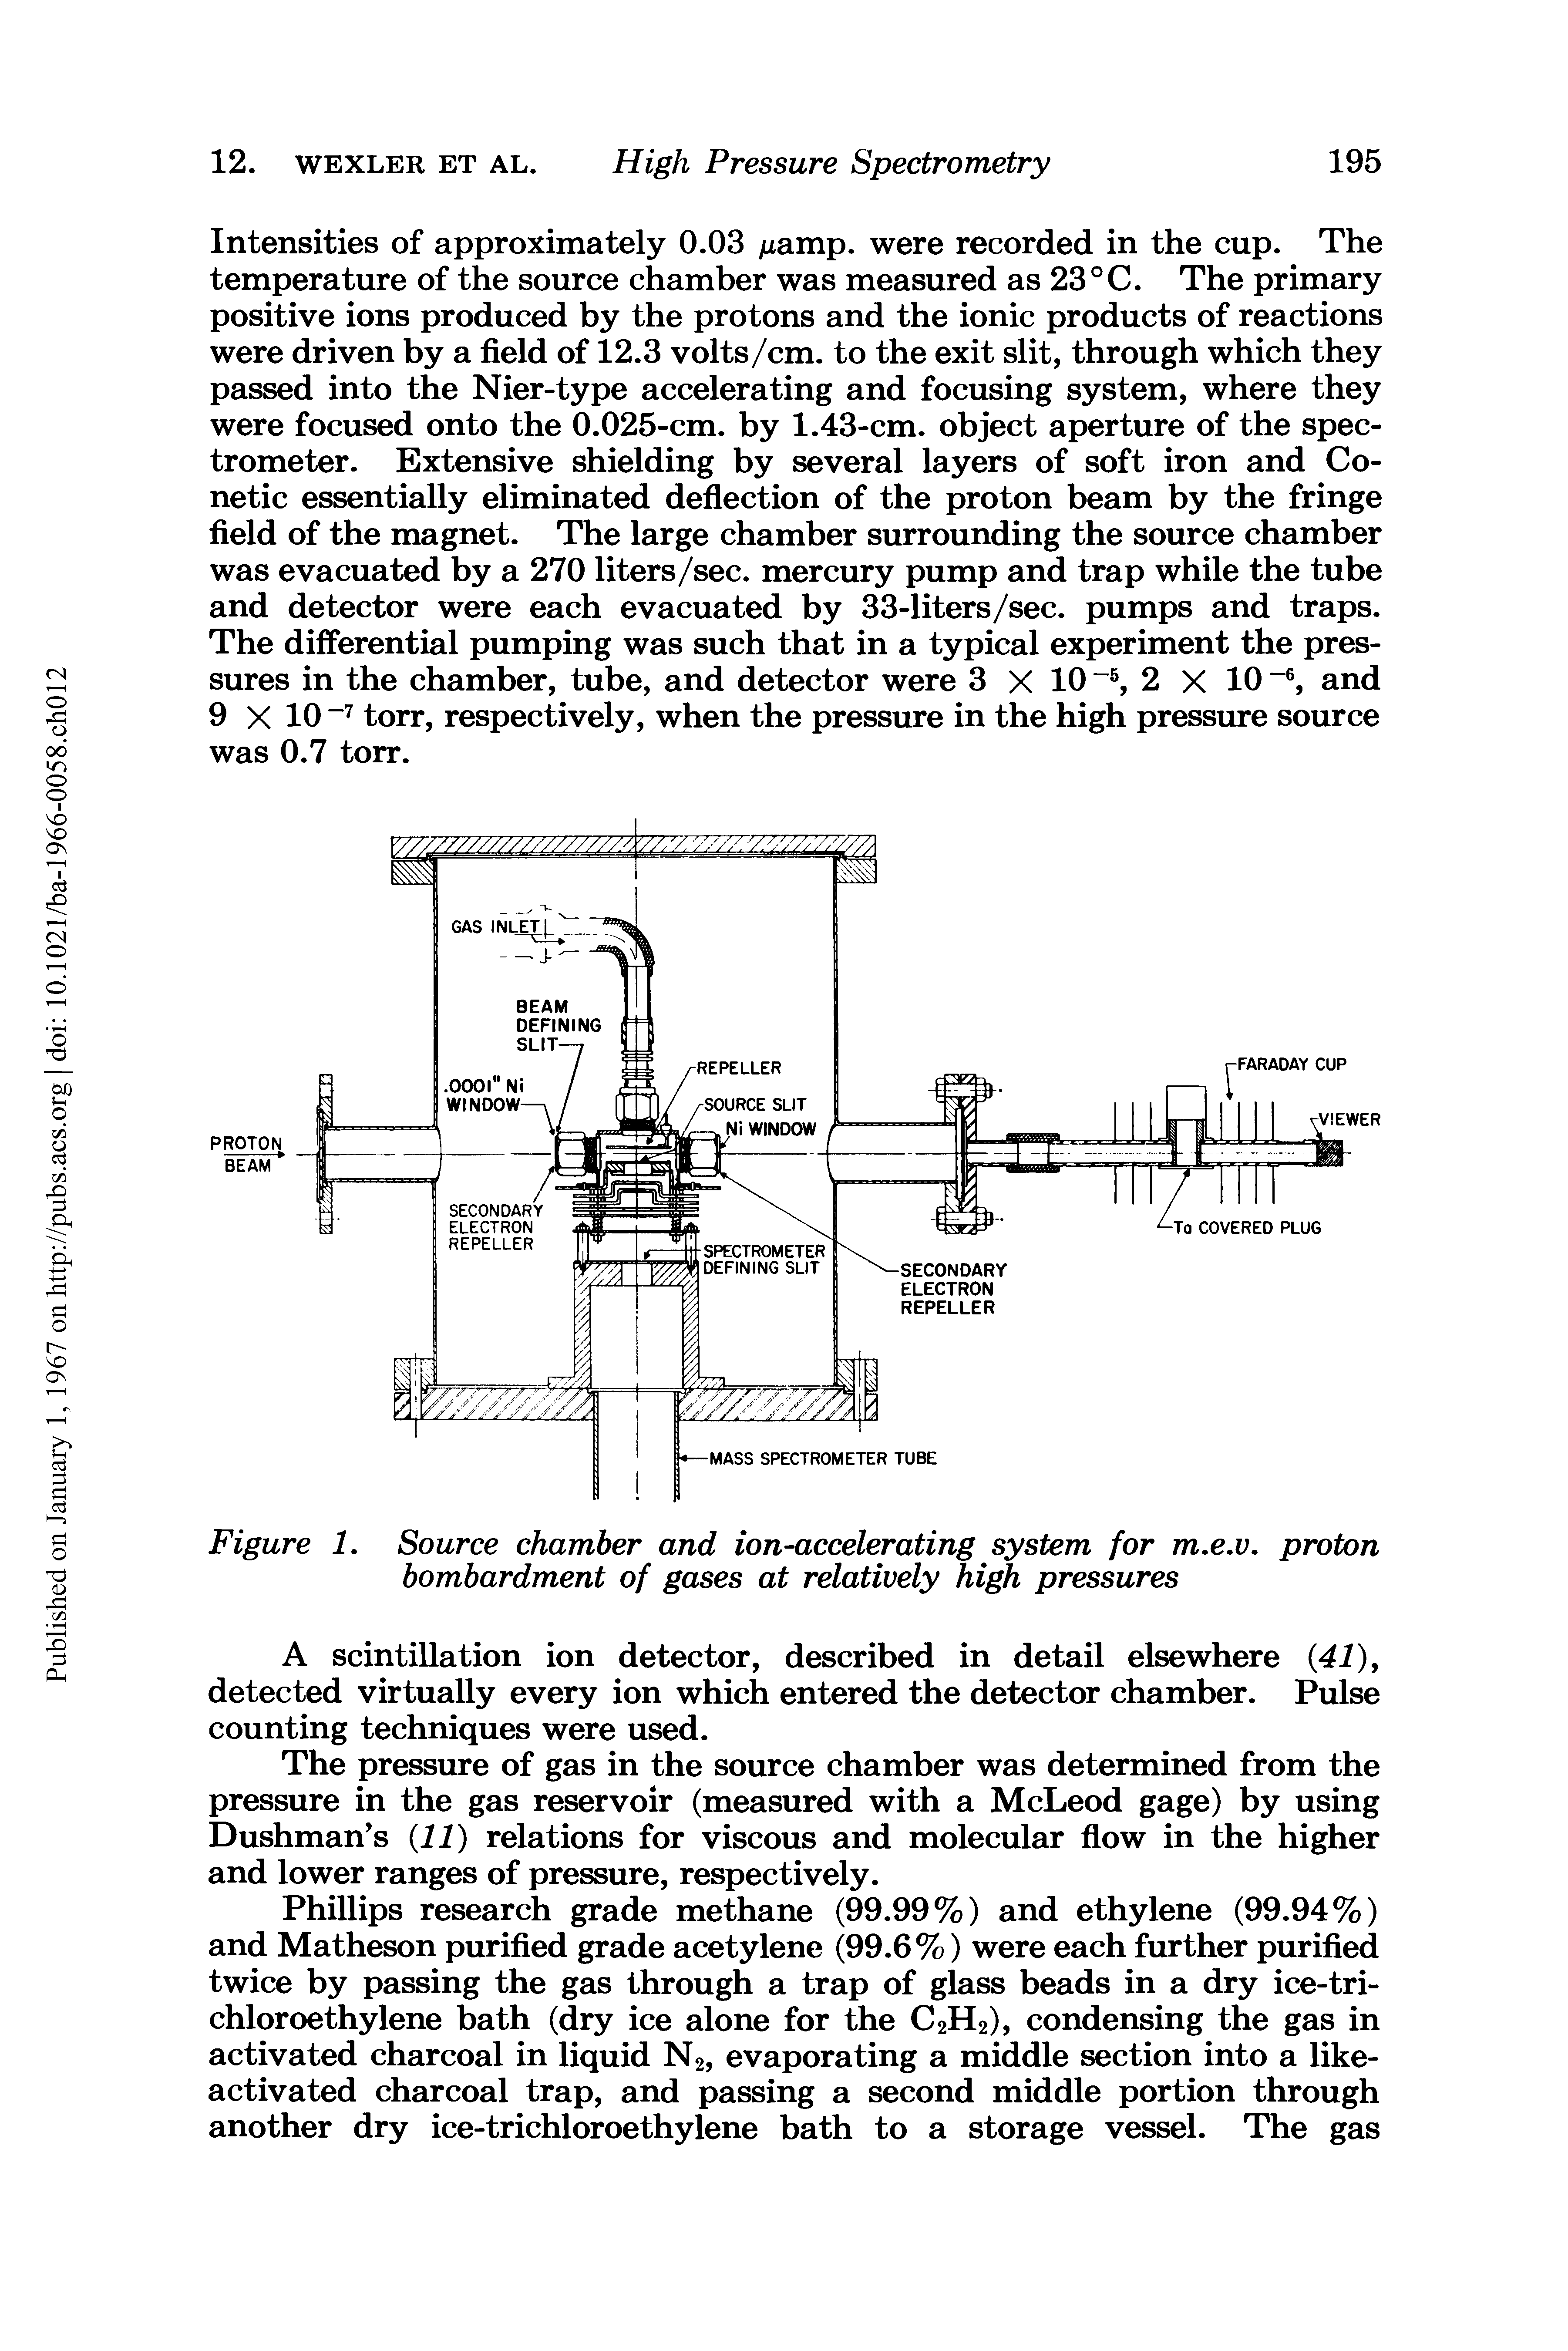 Figure 1. Source chamber and ion-accelerating system for m.e.v. proton bombardment of gases at relatively high pressures...